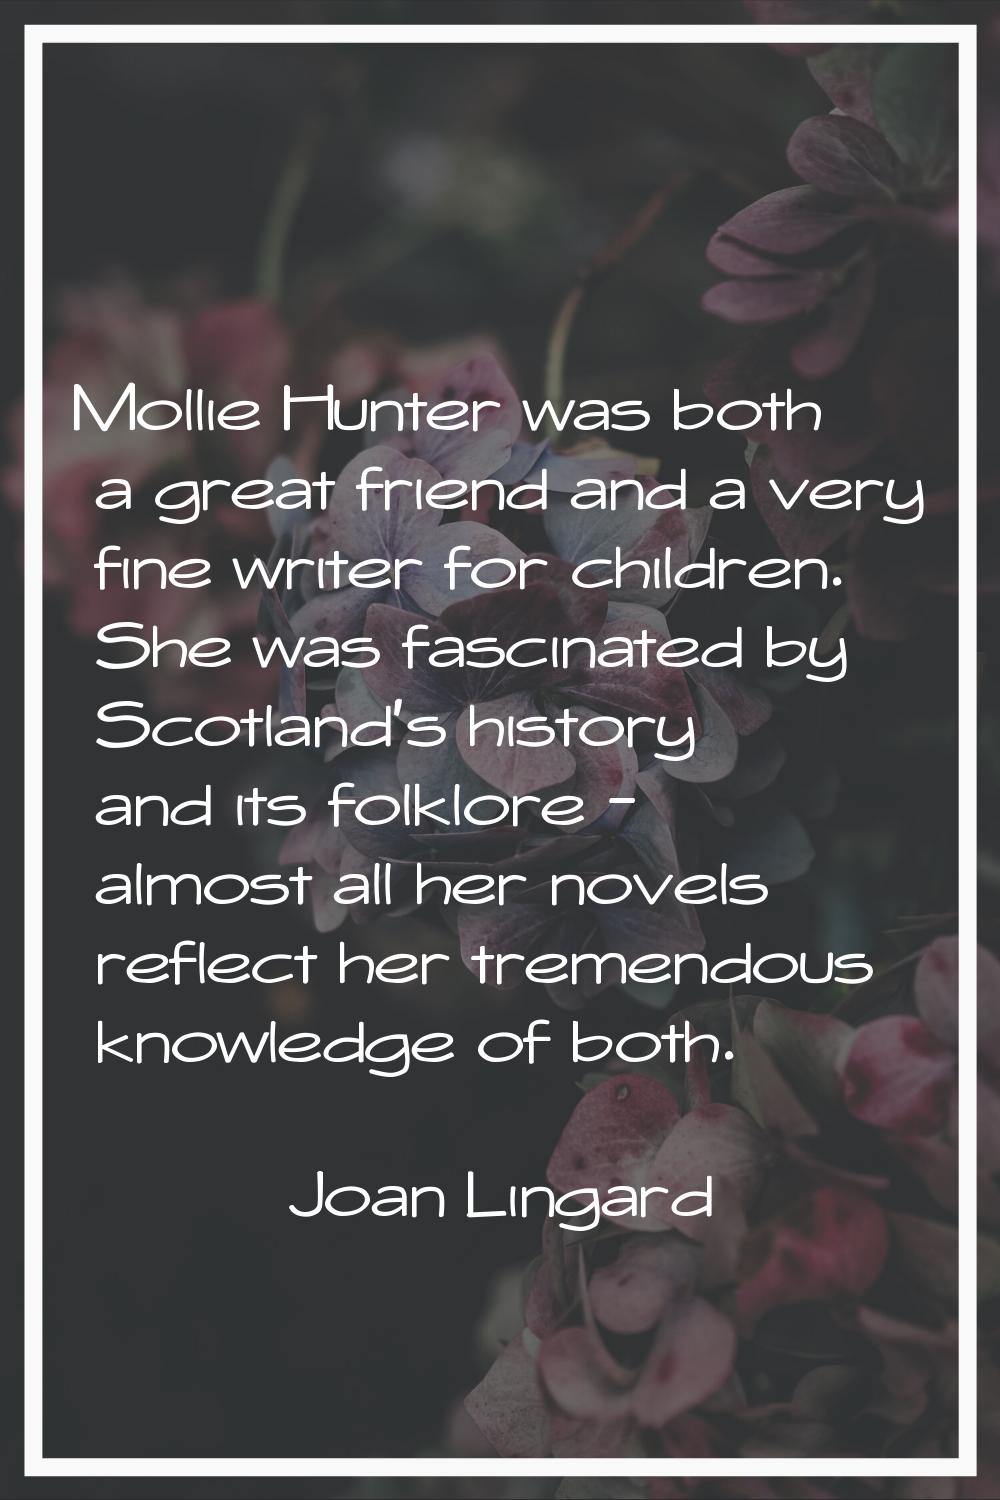 Mollie Hunter was both a great friend and a very fine writer for children. She was fascinated by Sc